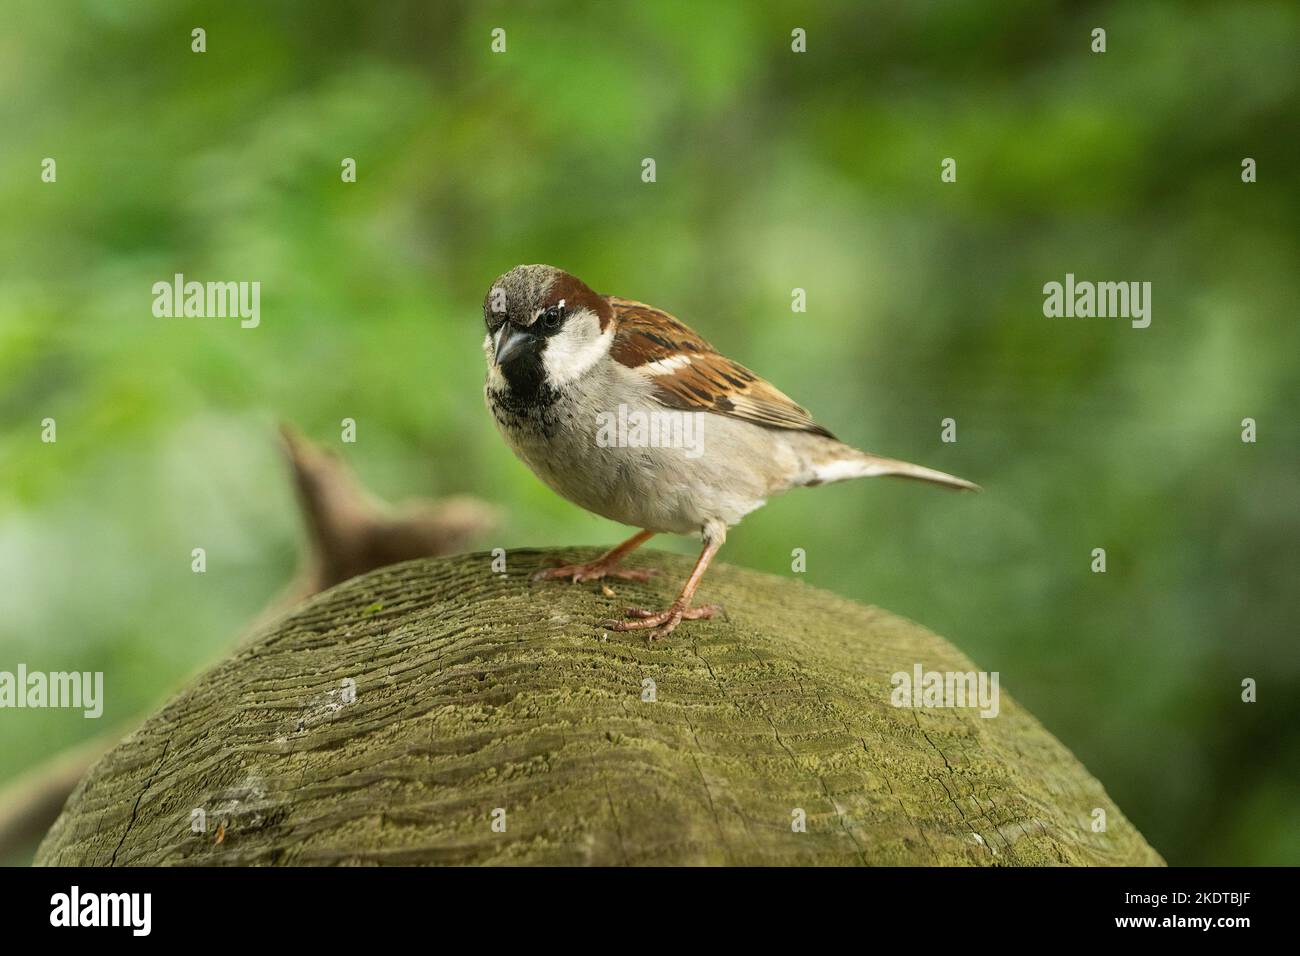 A Male Eurasian House Sparrow Passer domesticus common perching bird on a tree stem Stock Photo